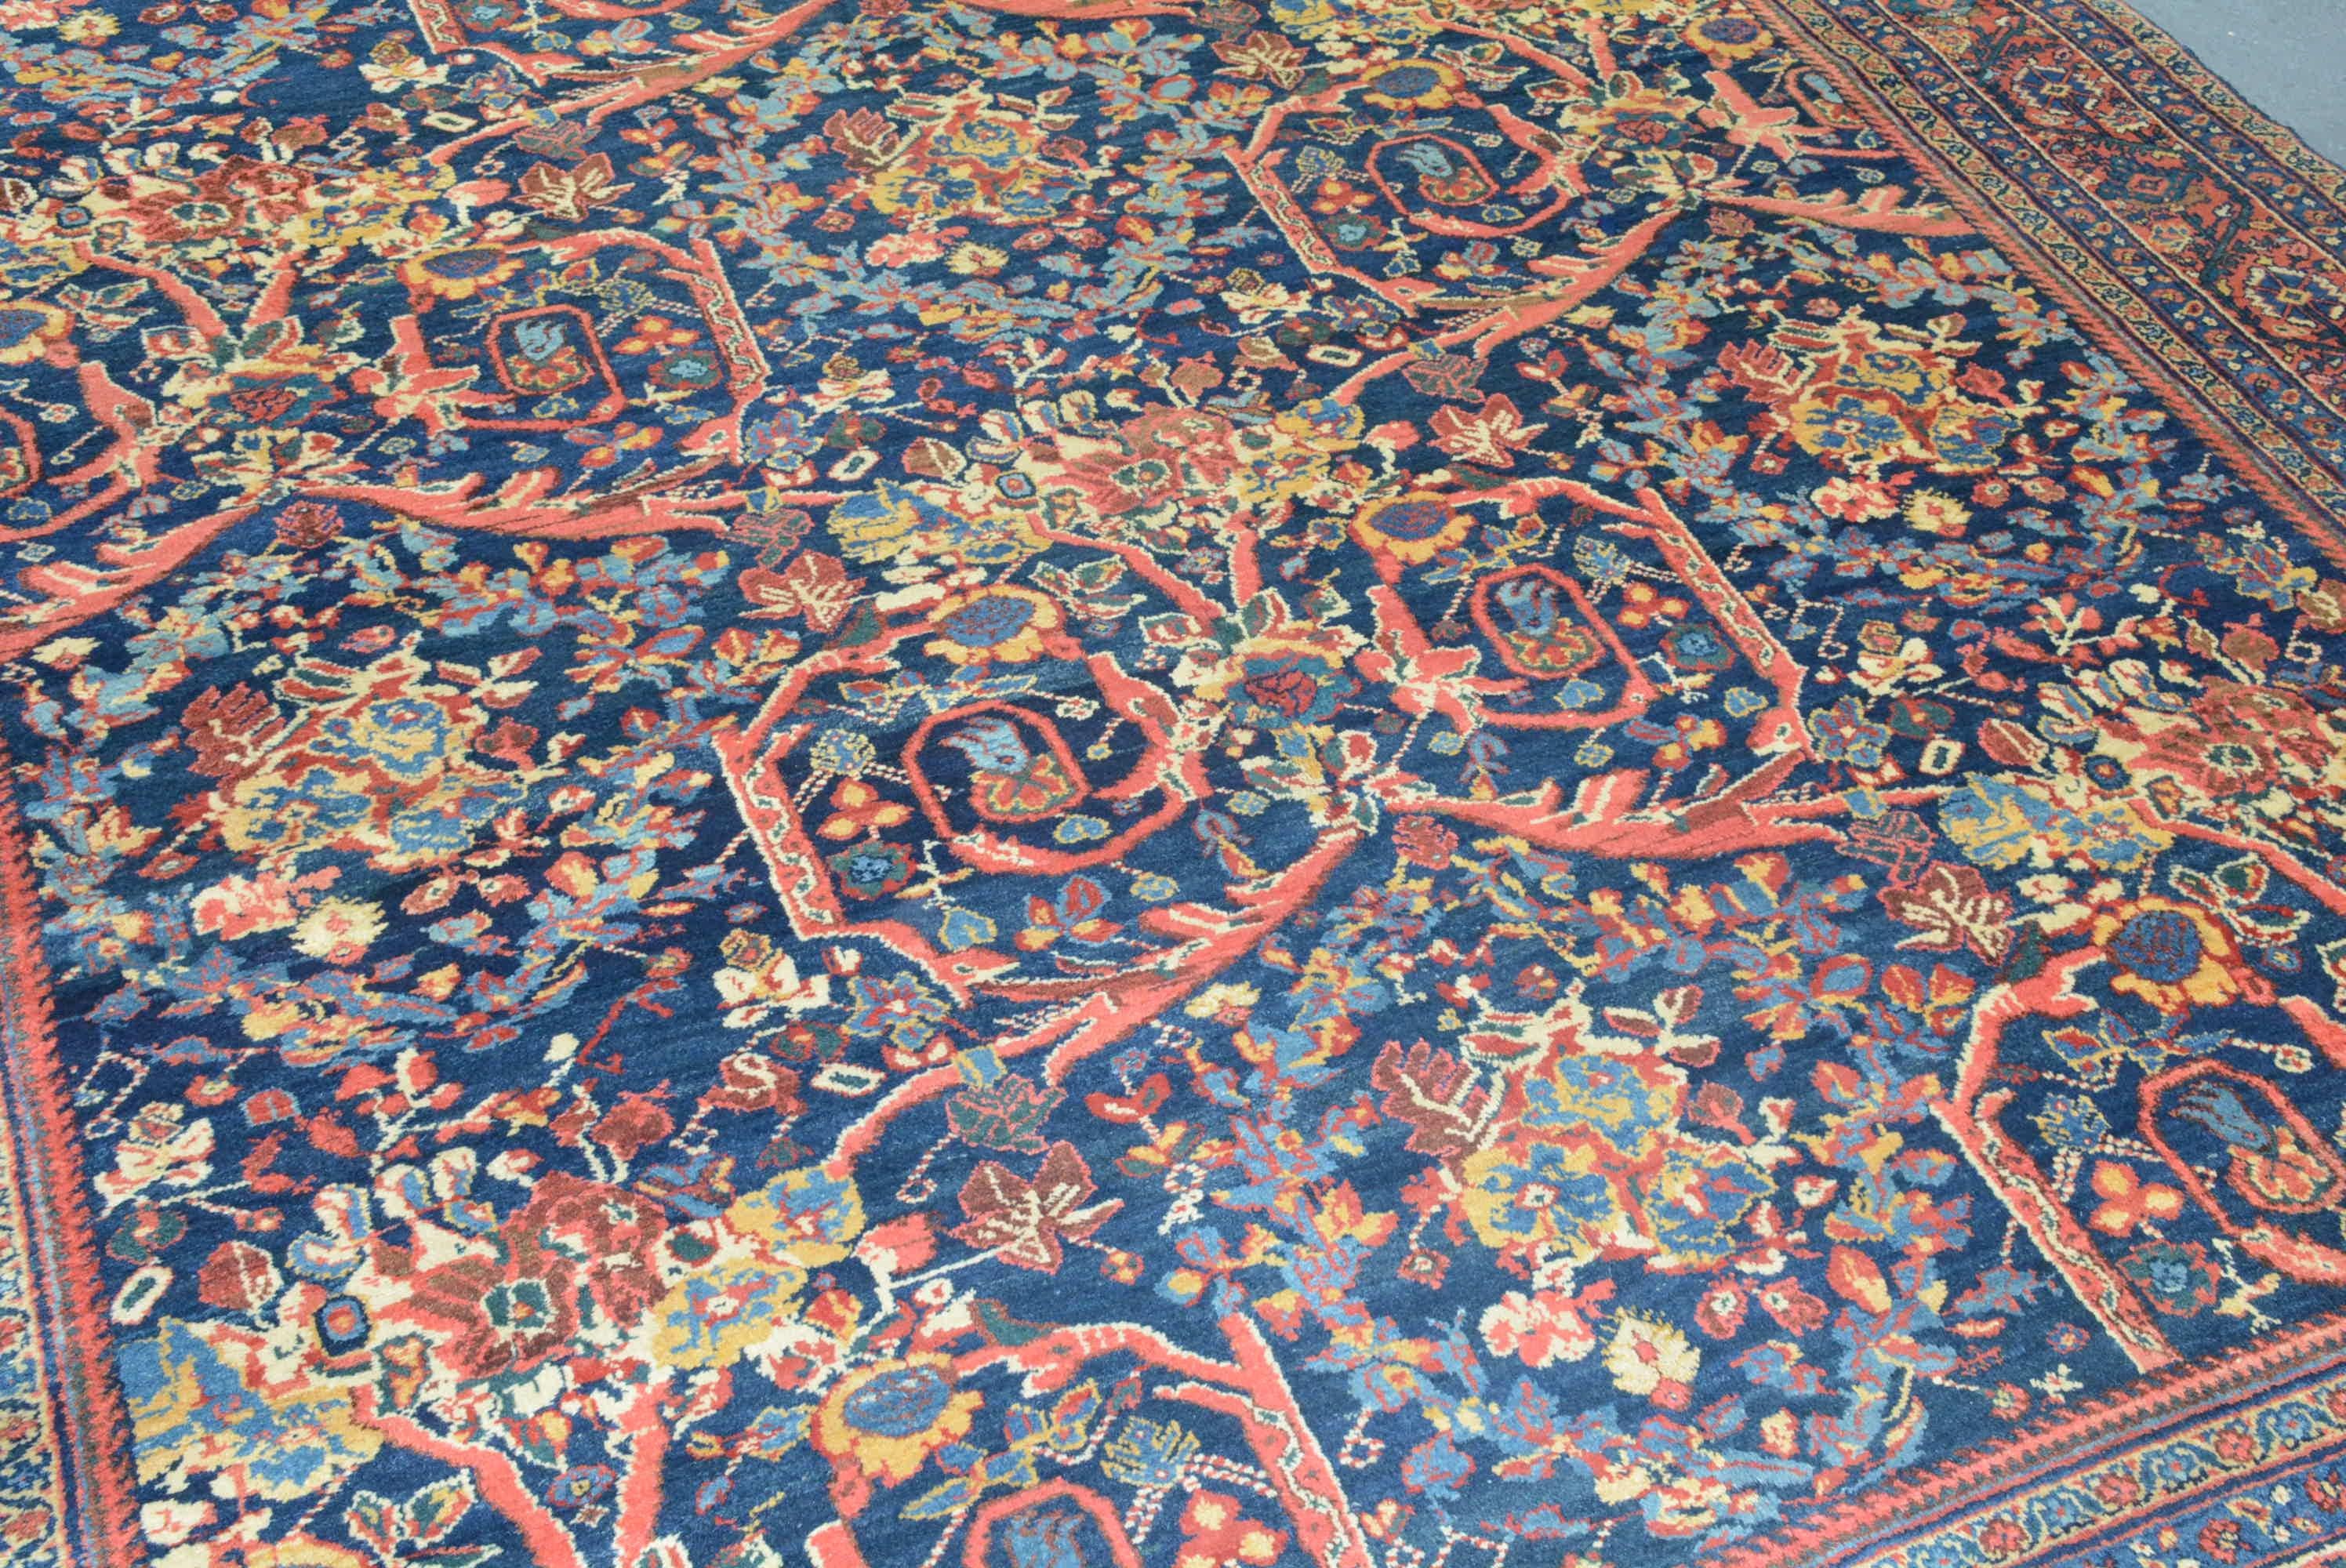 The Arak region in central Persia is generally accepted to have produced more large carpets than any other province in that country. During the second half of the nineteenth century, new carpet production commenced expressly for export to both